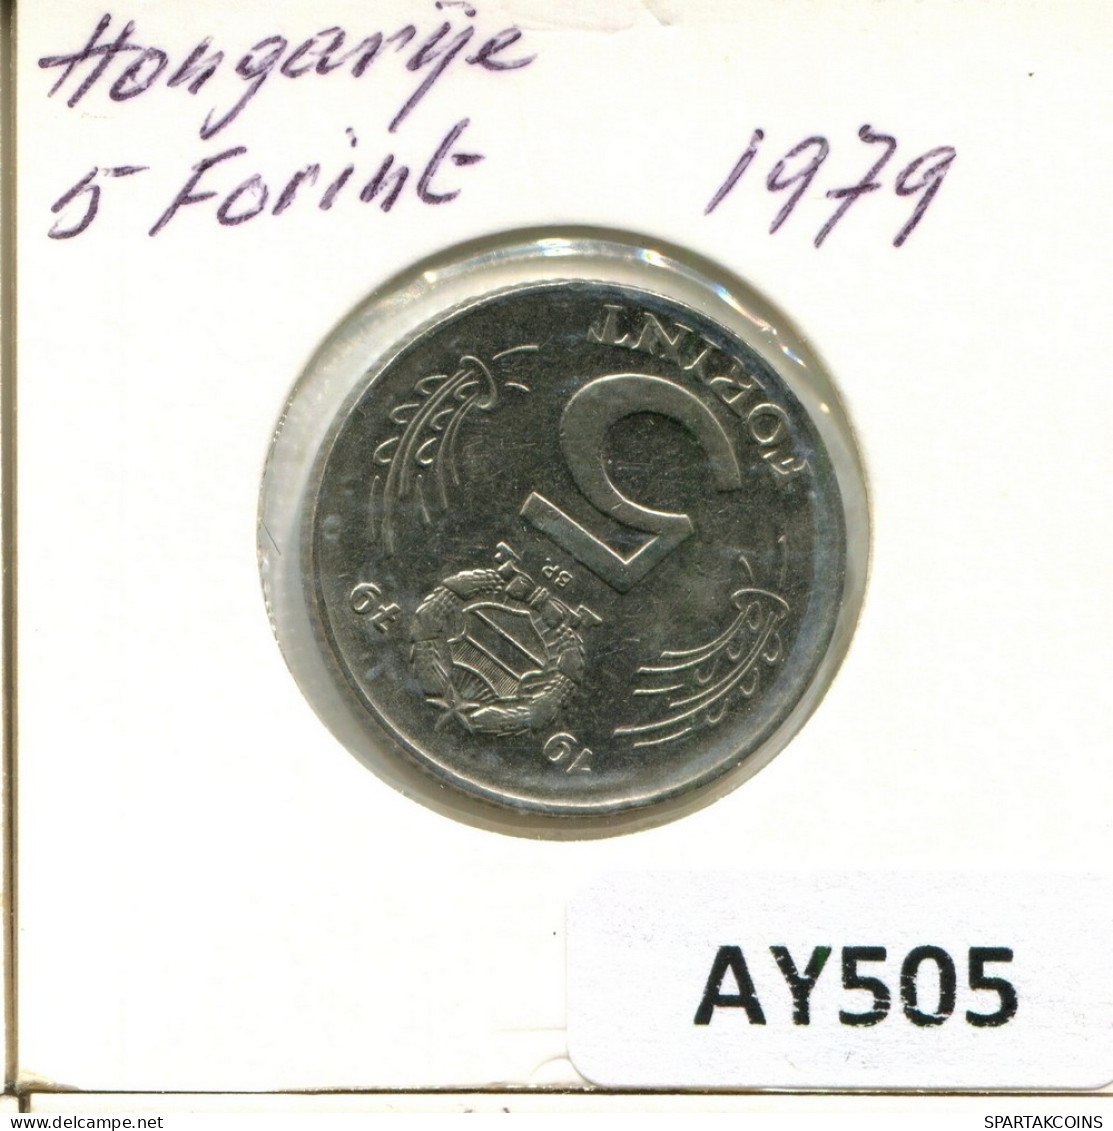 5 FORINT 1979 HUNGARY Coin #AY505.U.A - Ungheria